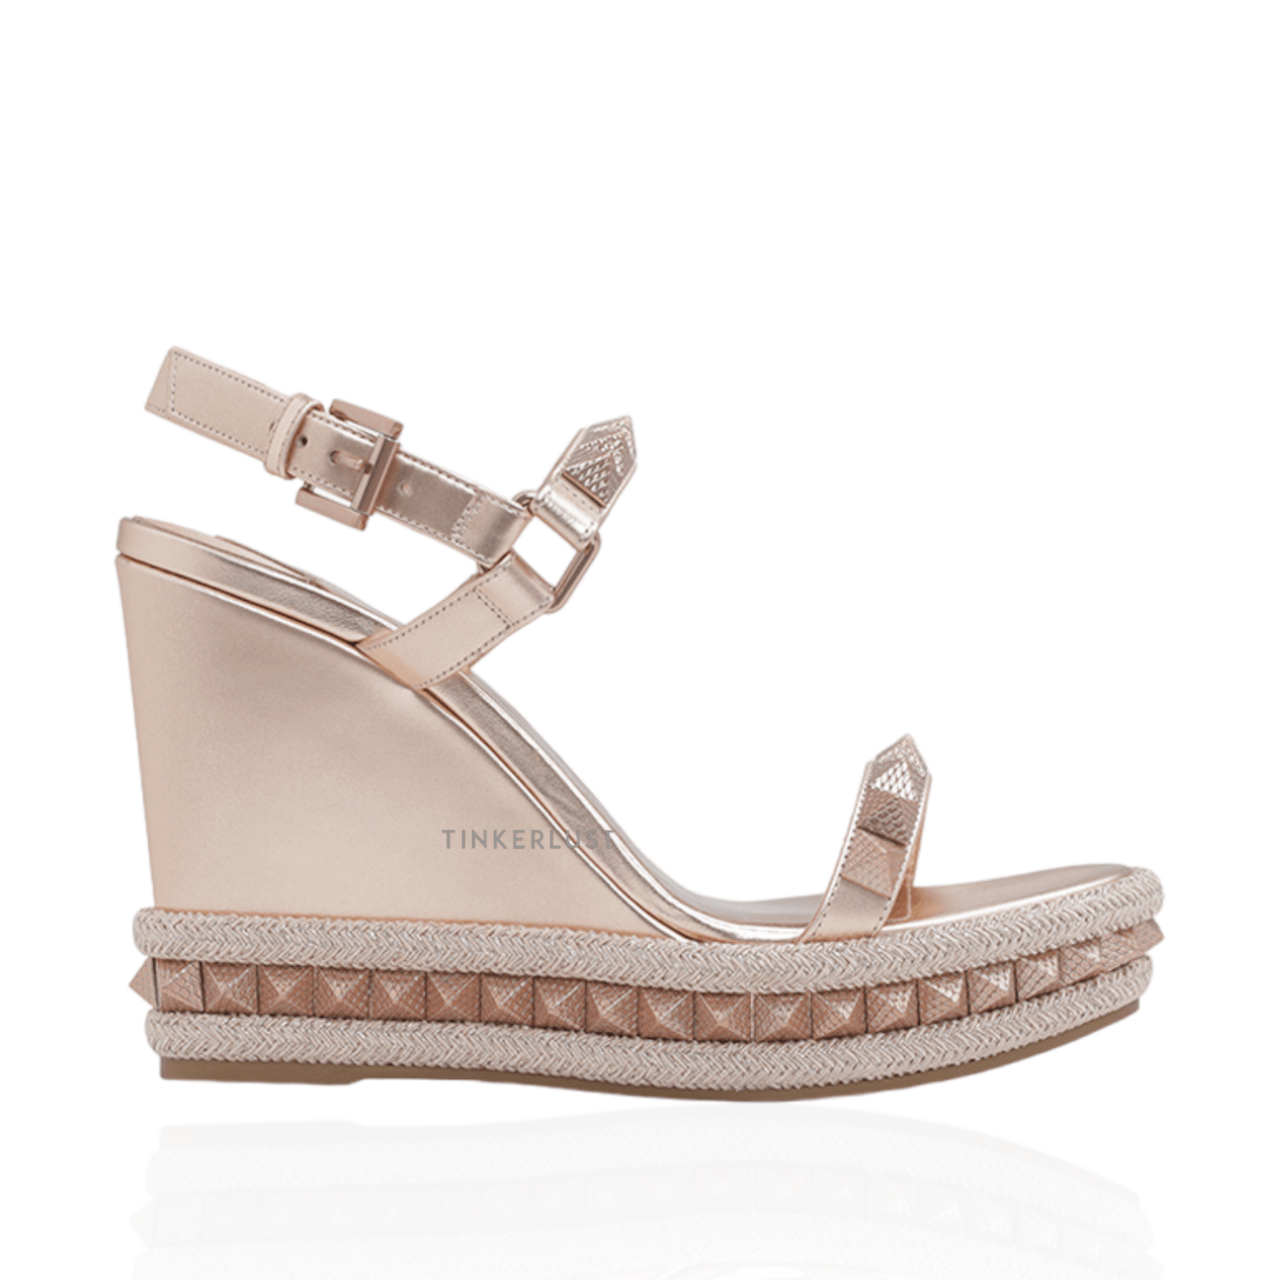 Christian Louboutin Pyraclou 110mm Espadrilles in Beige Leather Wedges